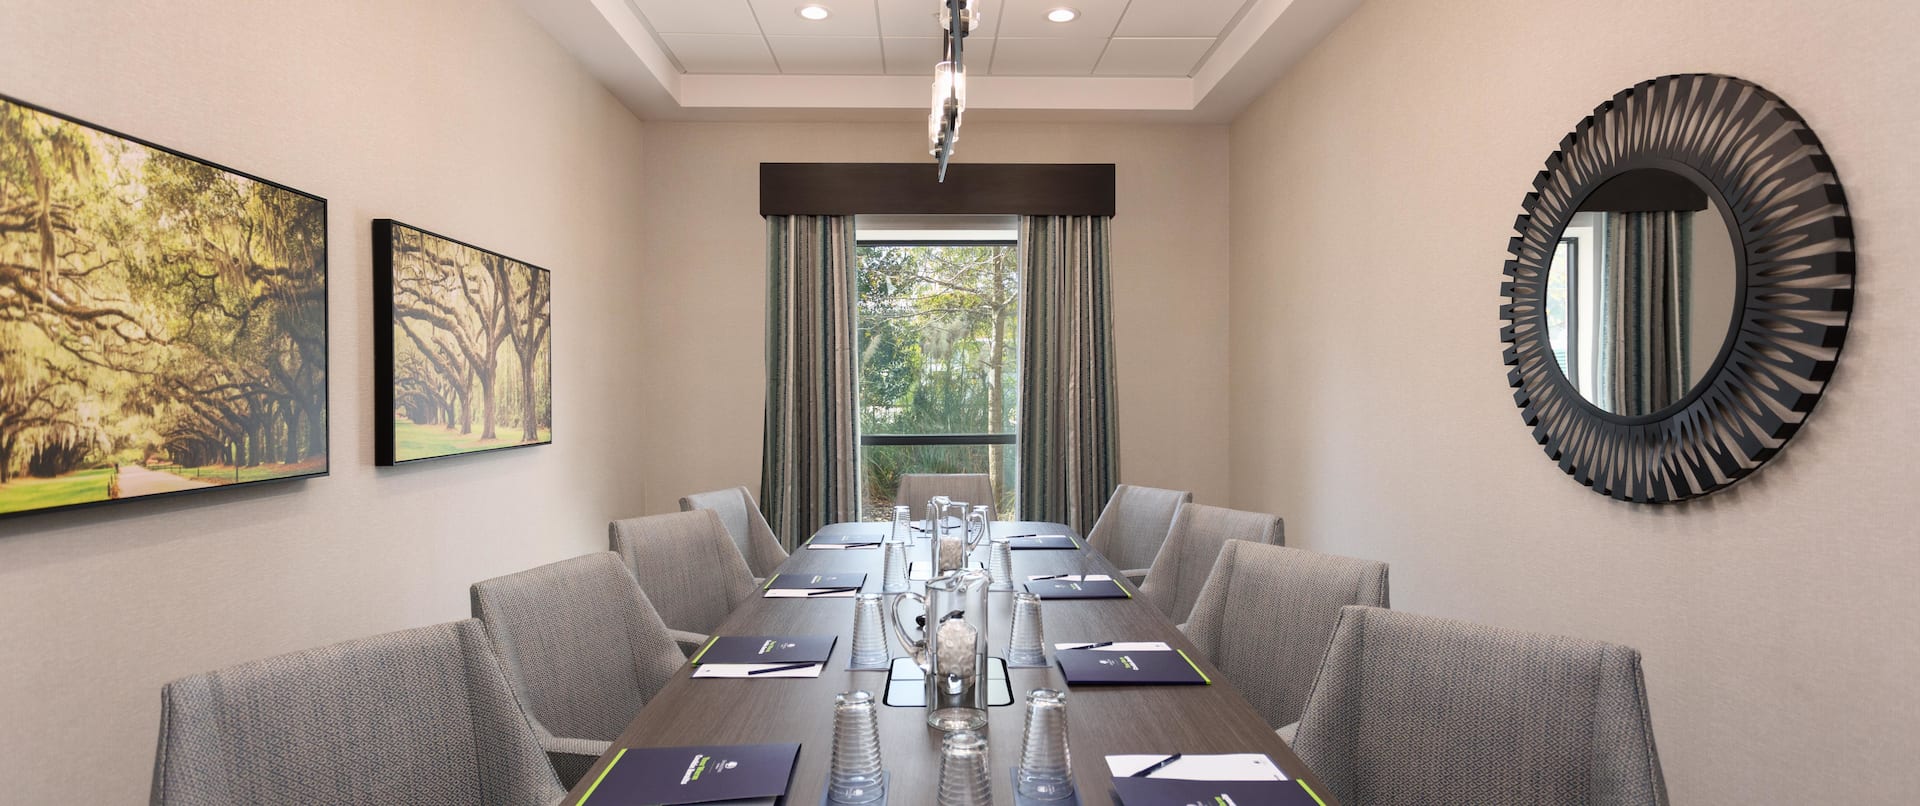 Boardroom Table and Chairs, Wall Art and Window